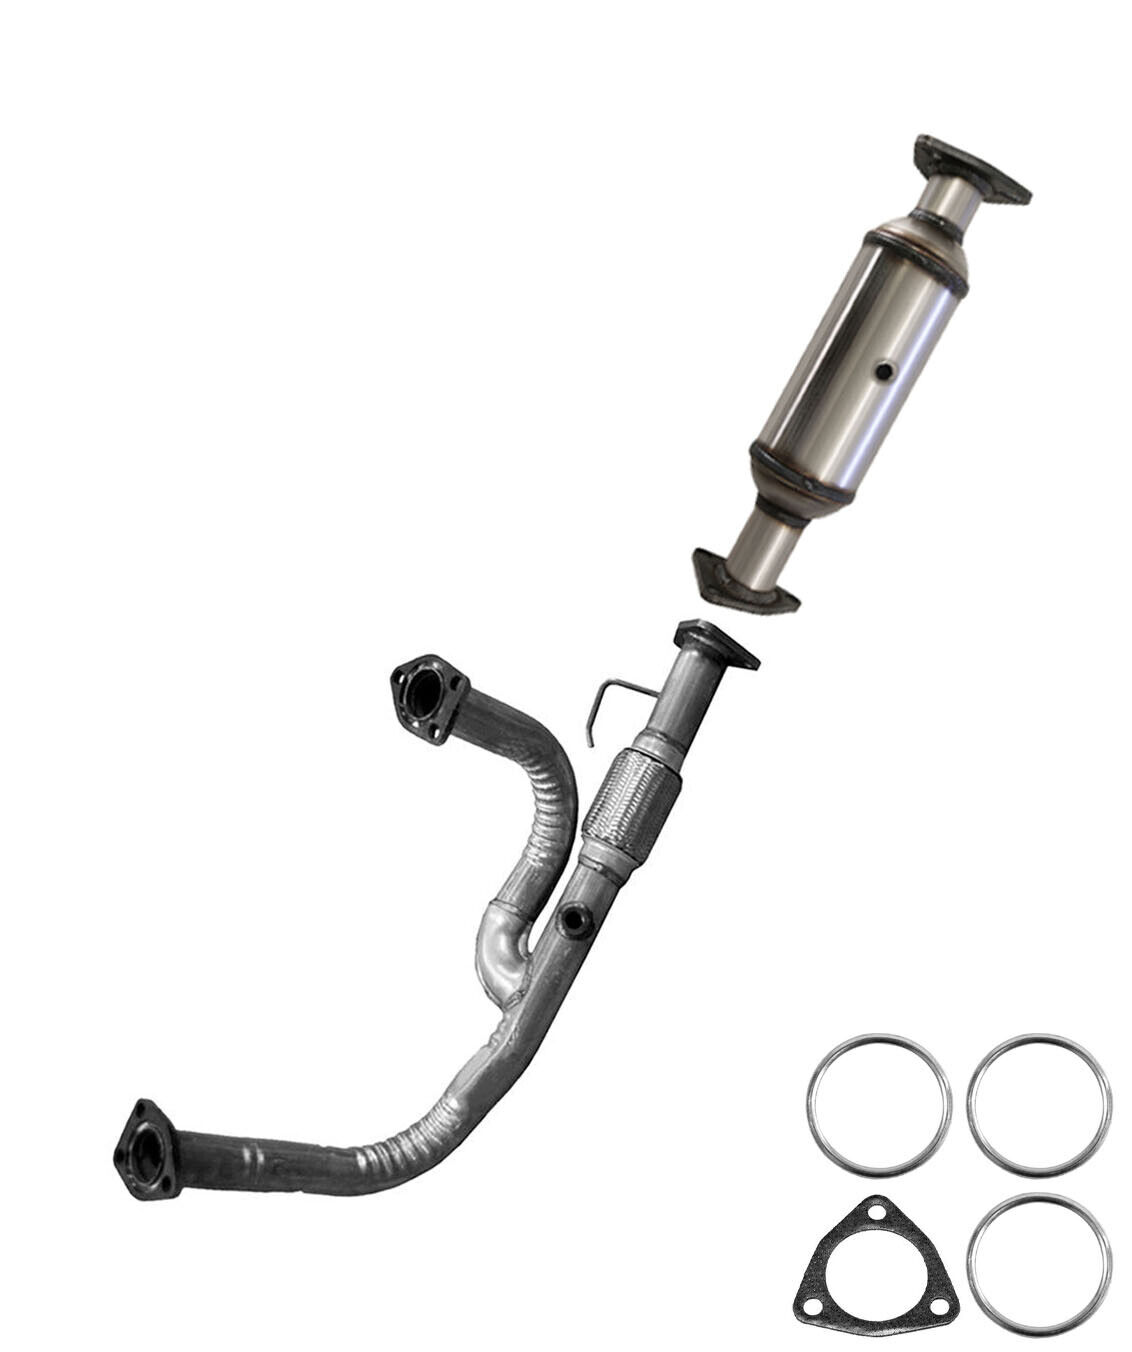 Catalytic Converter Y-pipe Exhaust with Flex fits: 2001-2002 MDX 2003-2004 Pilot